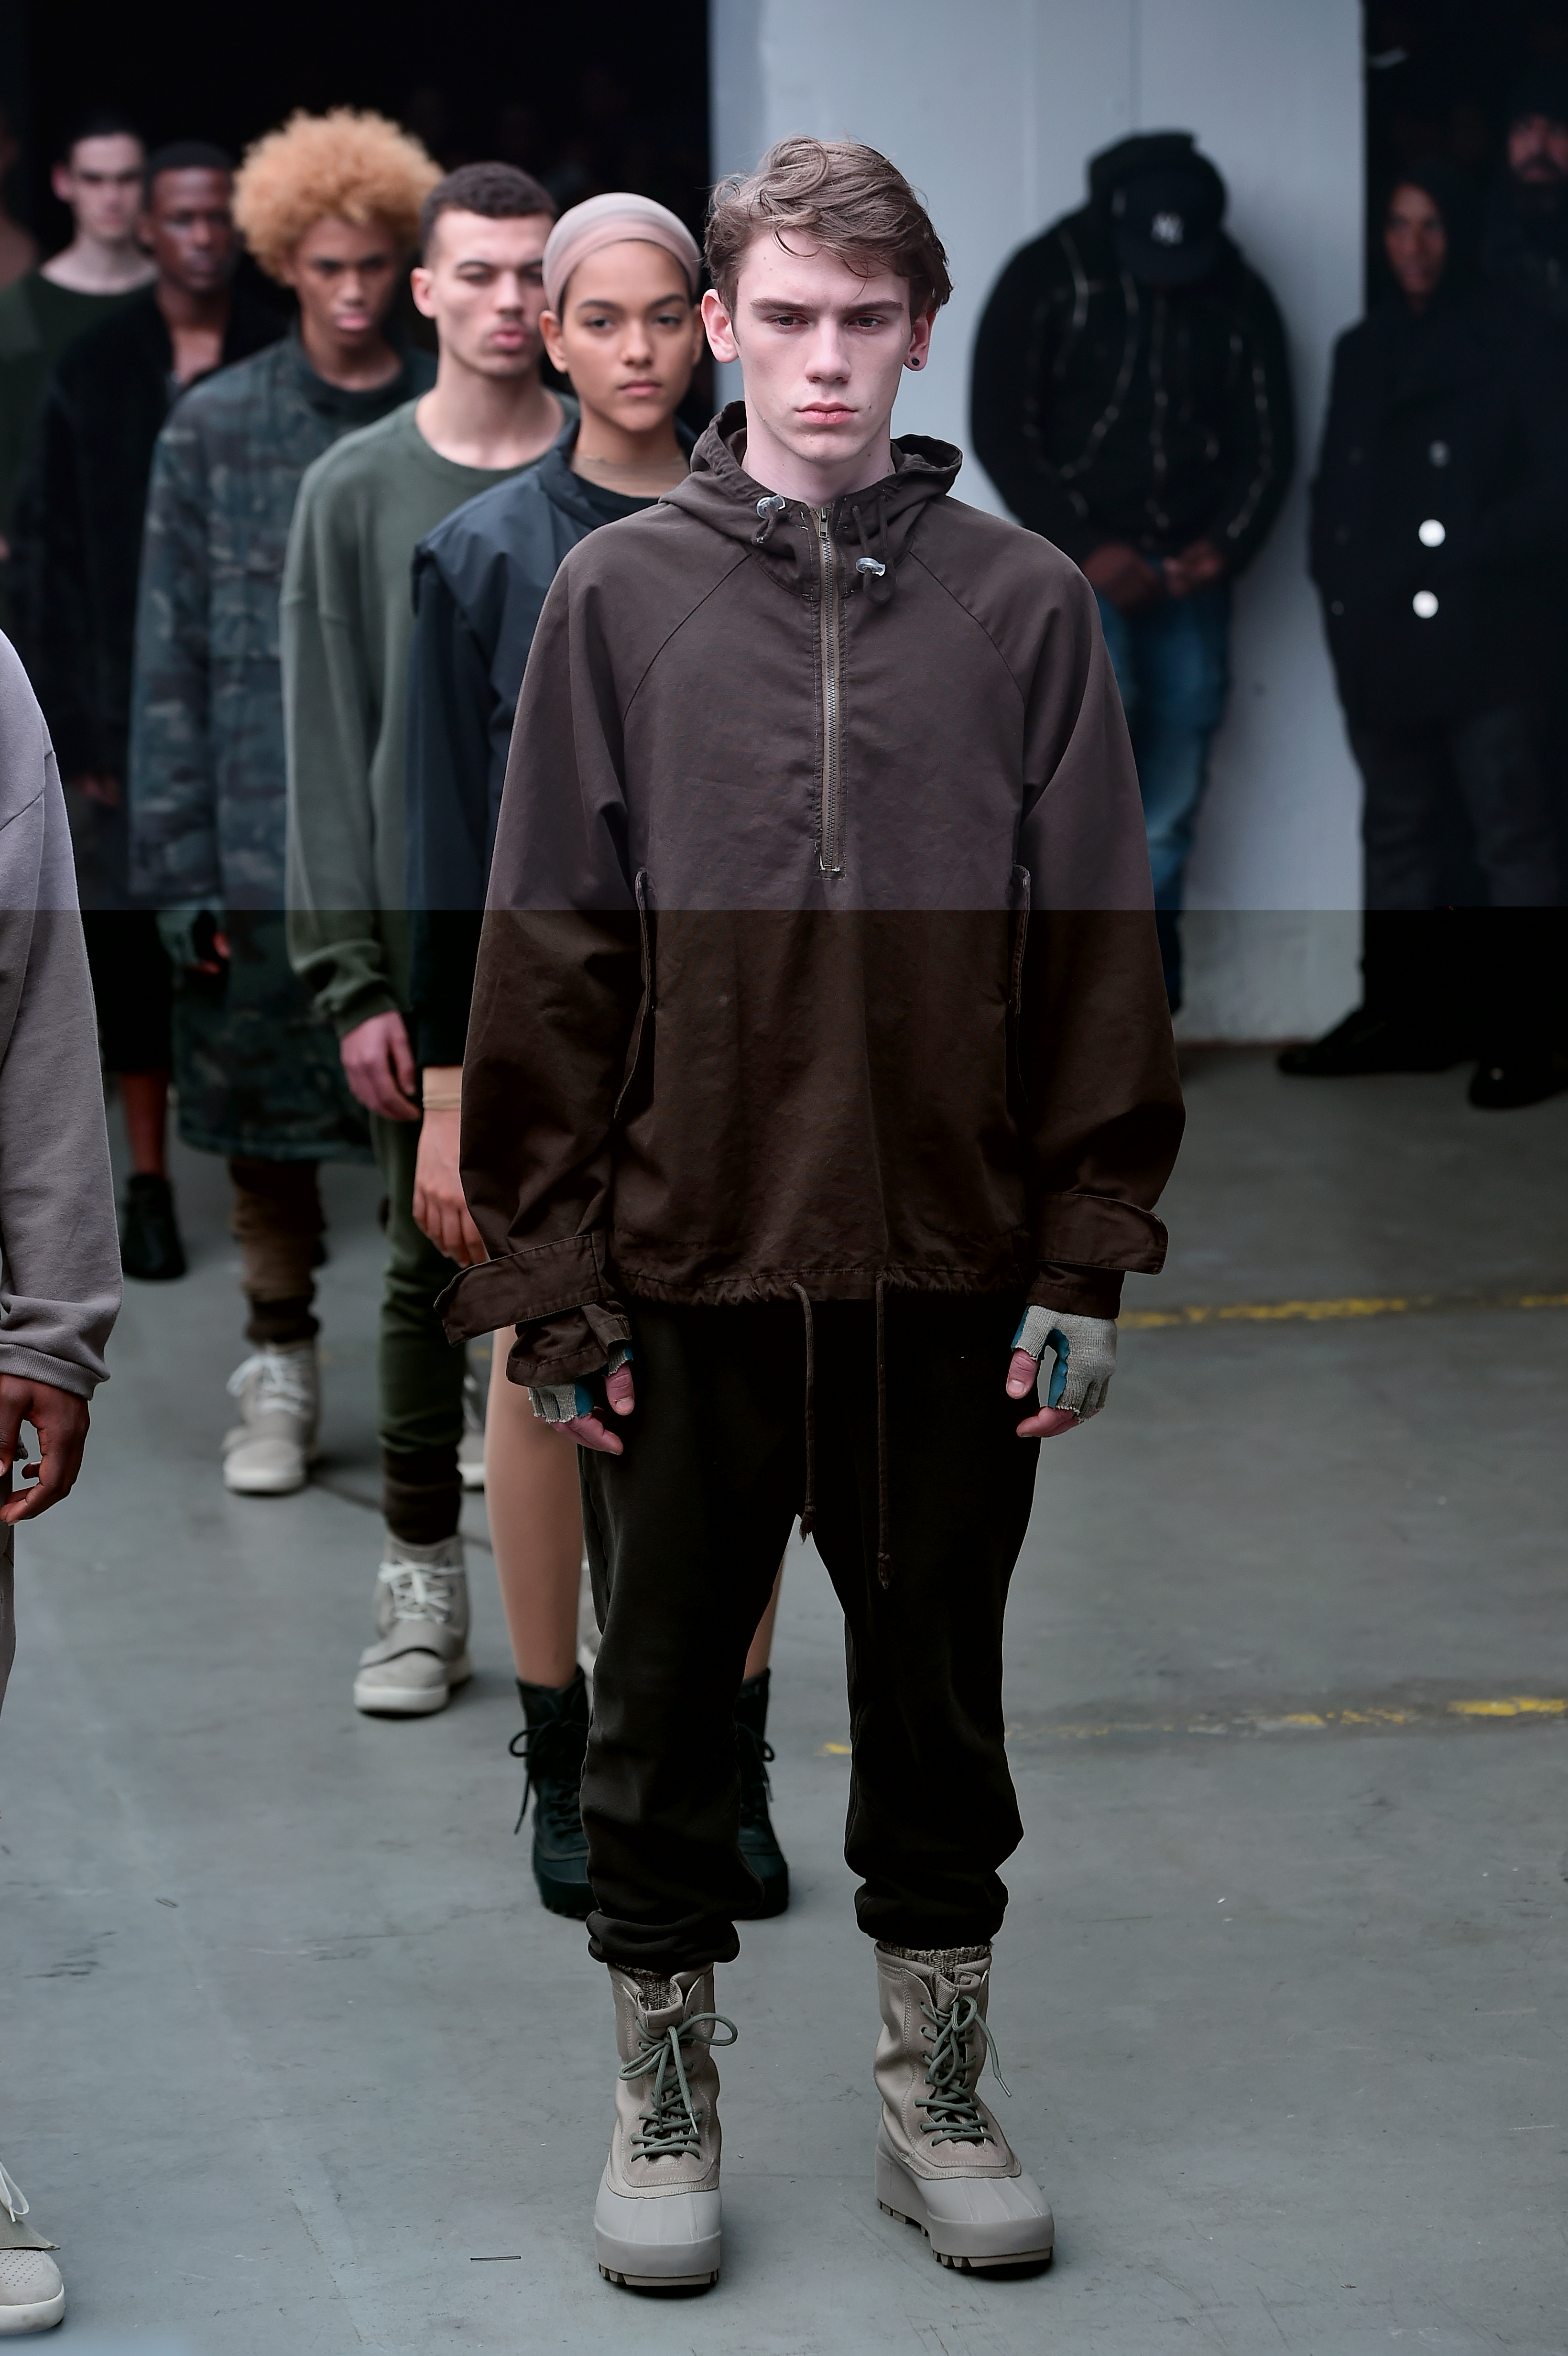 A Detailed Look At Kanye West's 'Yeezy Season 1' Range With Adidas Originals ...